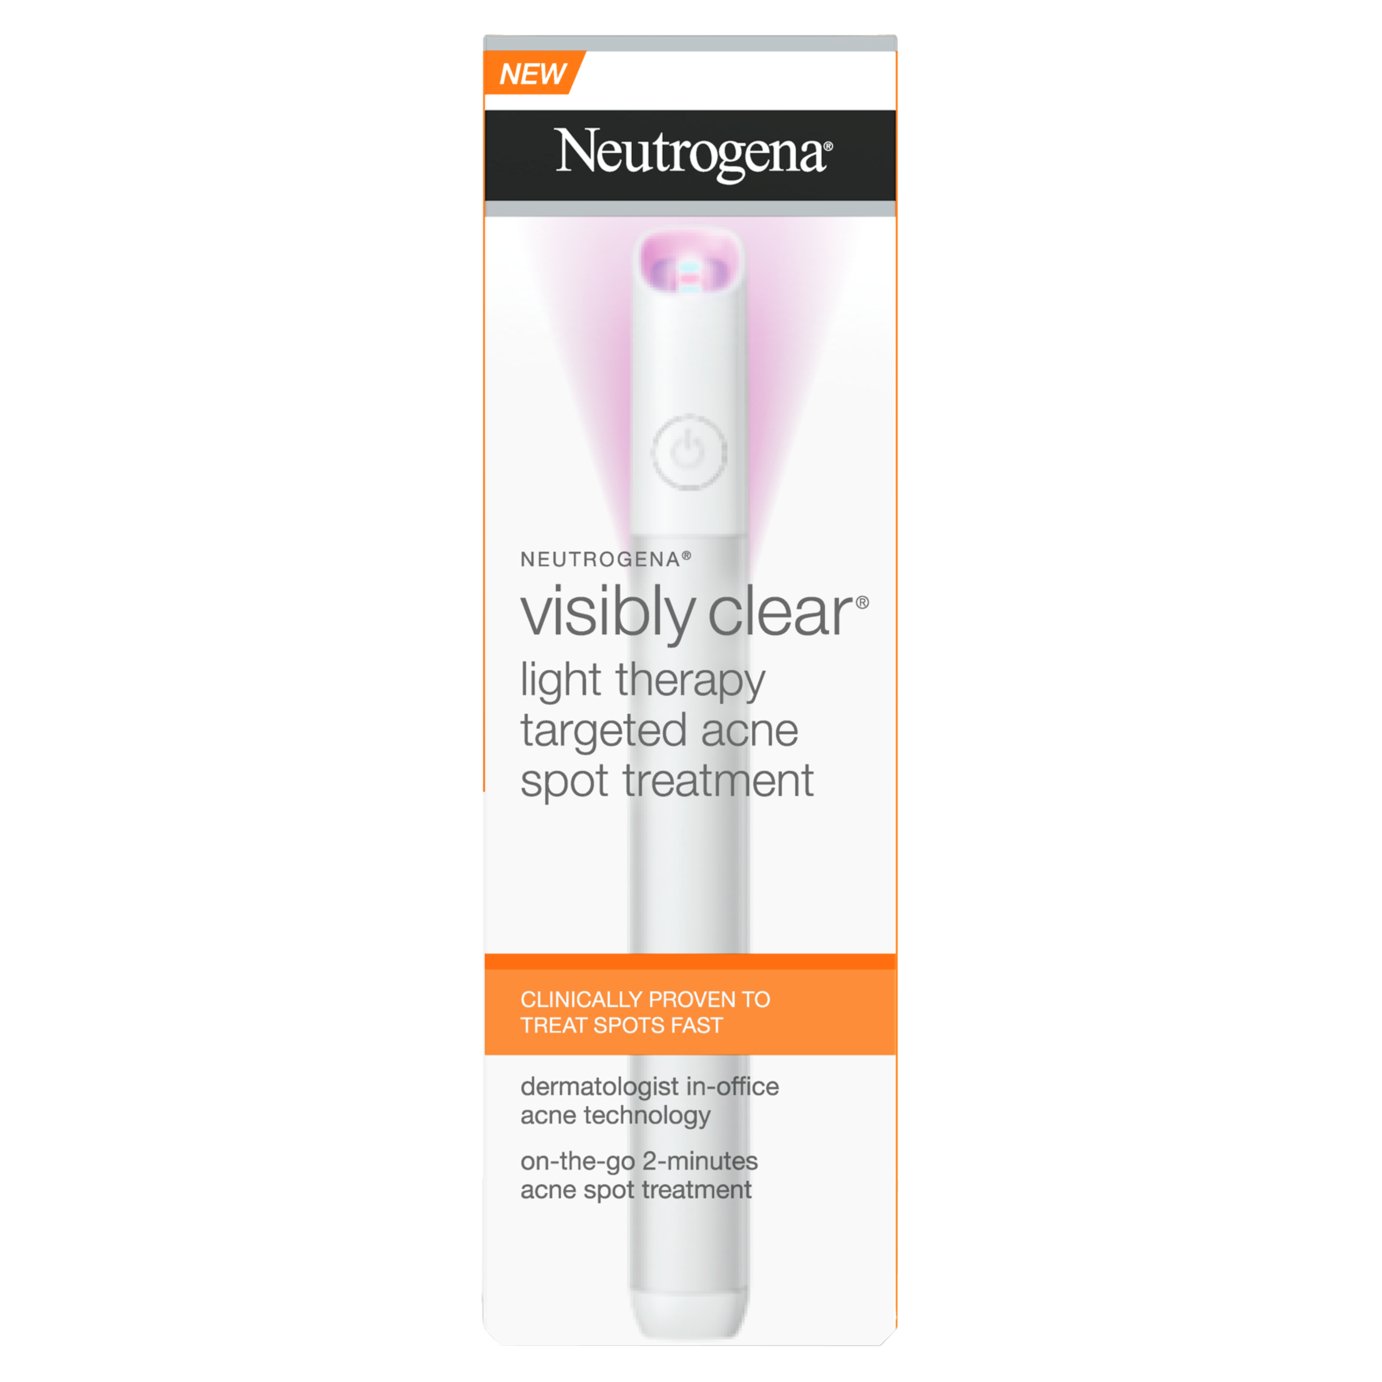 Neutrogena Visibly Clear Light Therapy